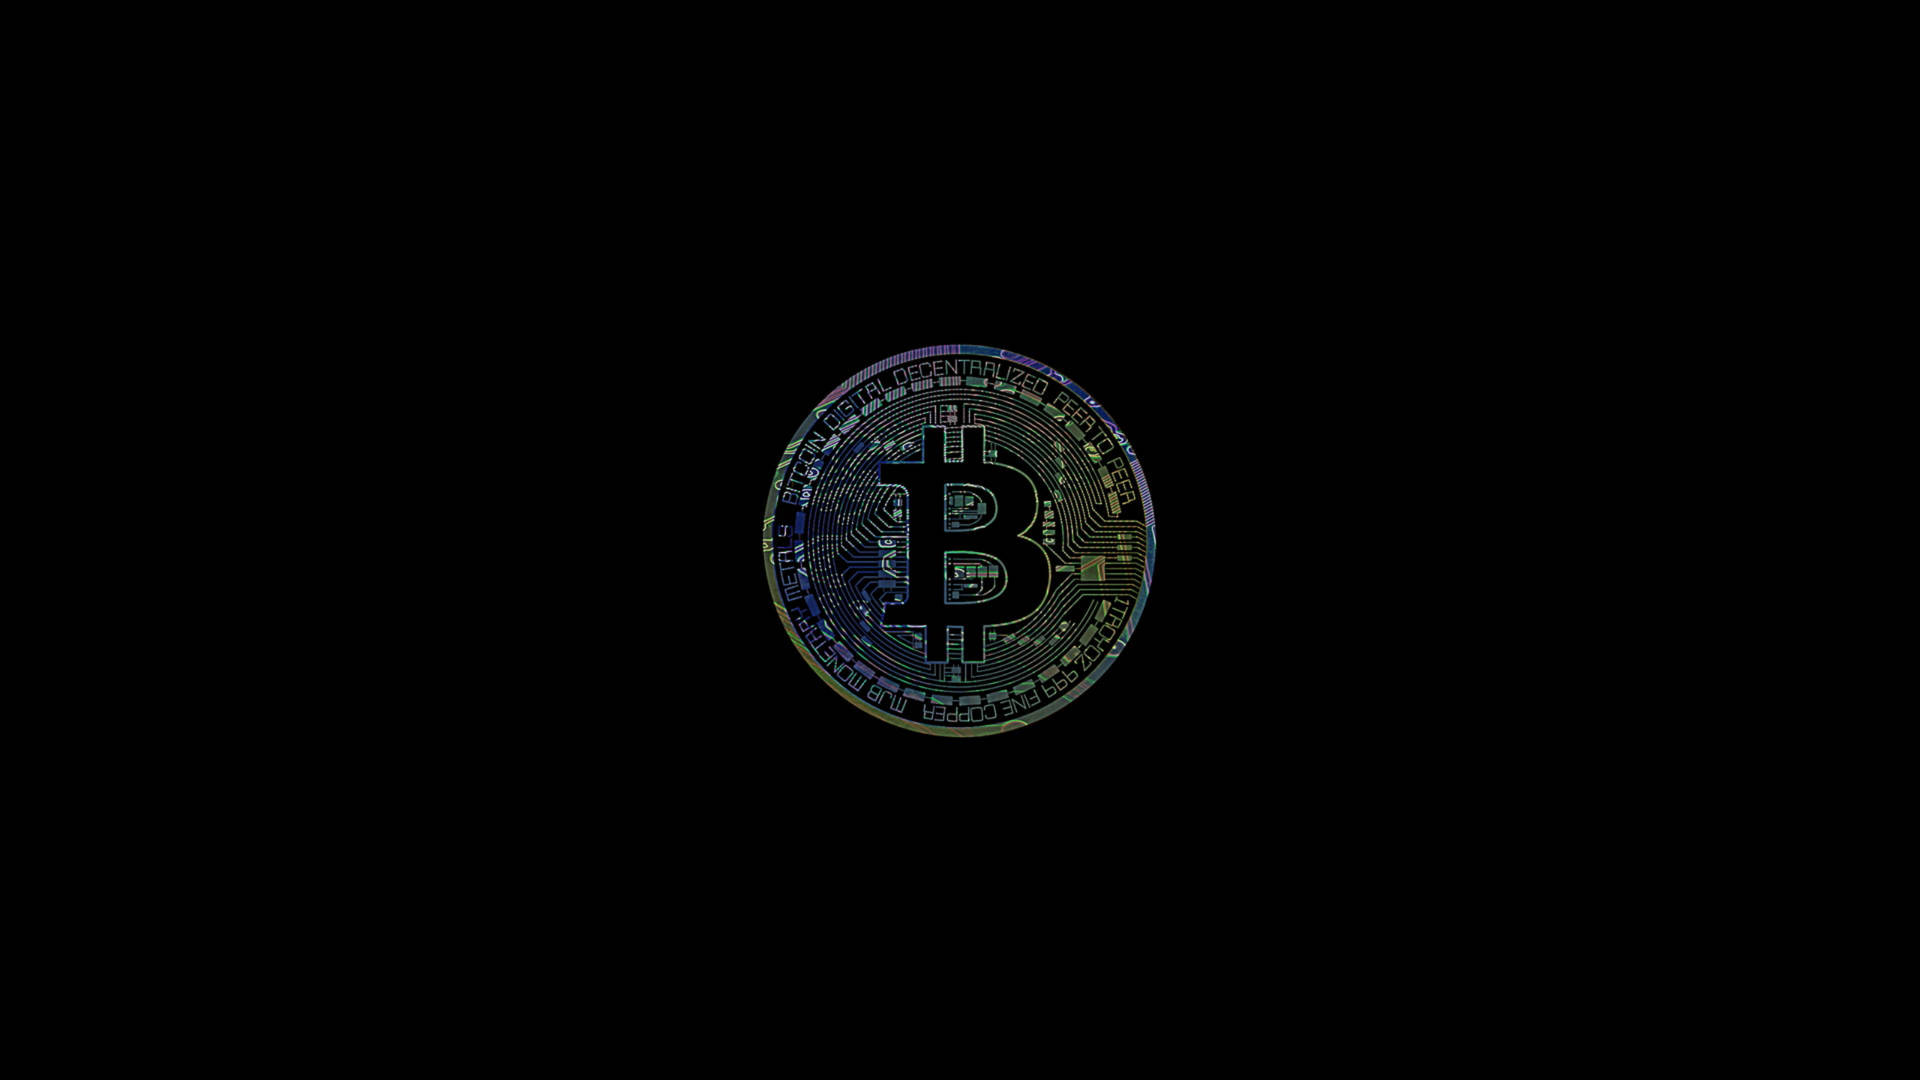 Different But Connected - Bitcoin Bringing People Together Wallpaper